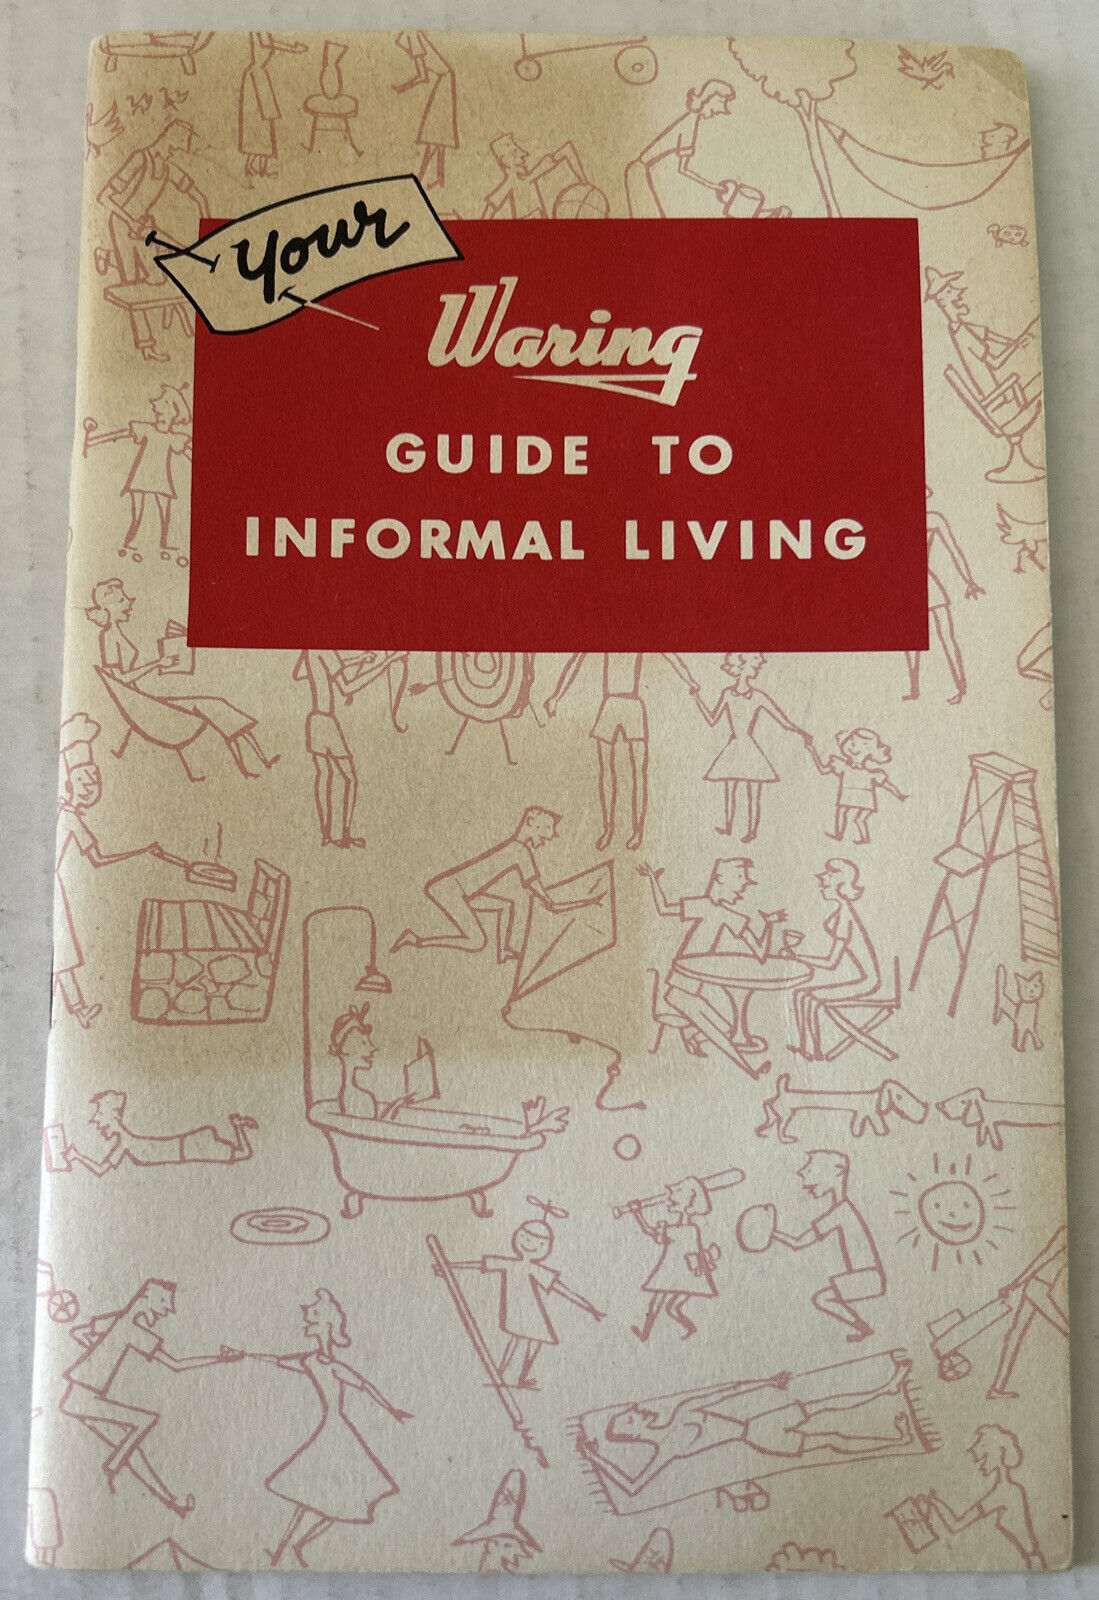 Your Waring Guide to Informal Living Out-of-this-world Recipes Vintage Book 1954